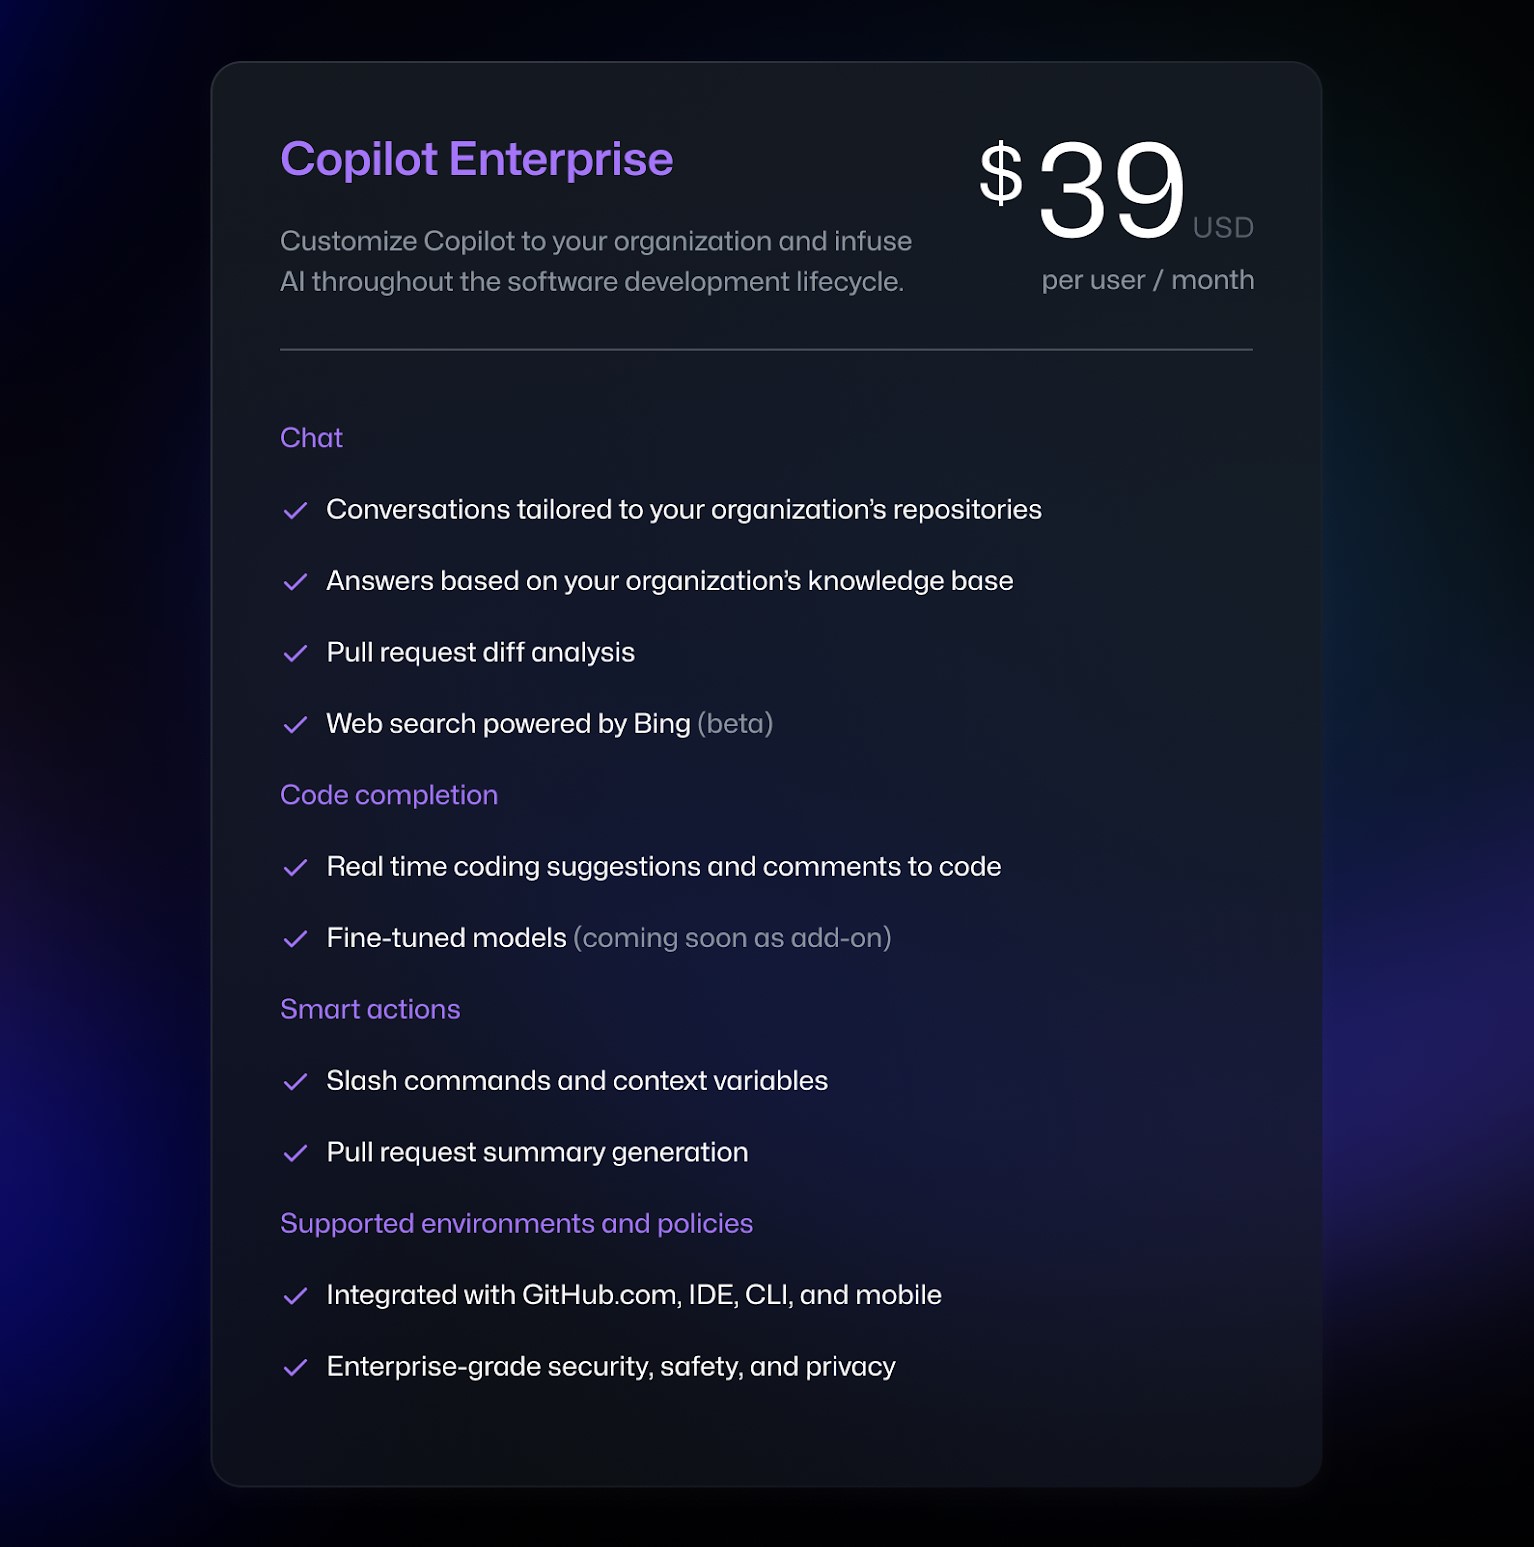 GitHub Copilot Enterprise pricing and features.